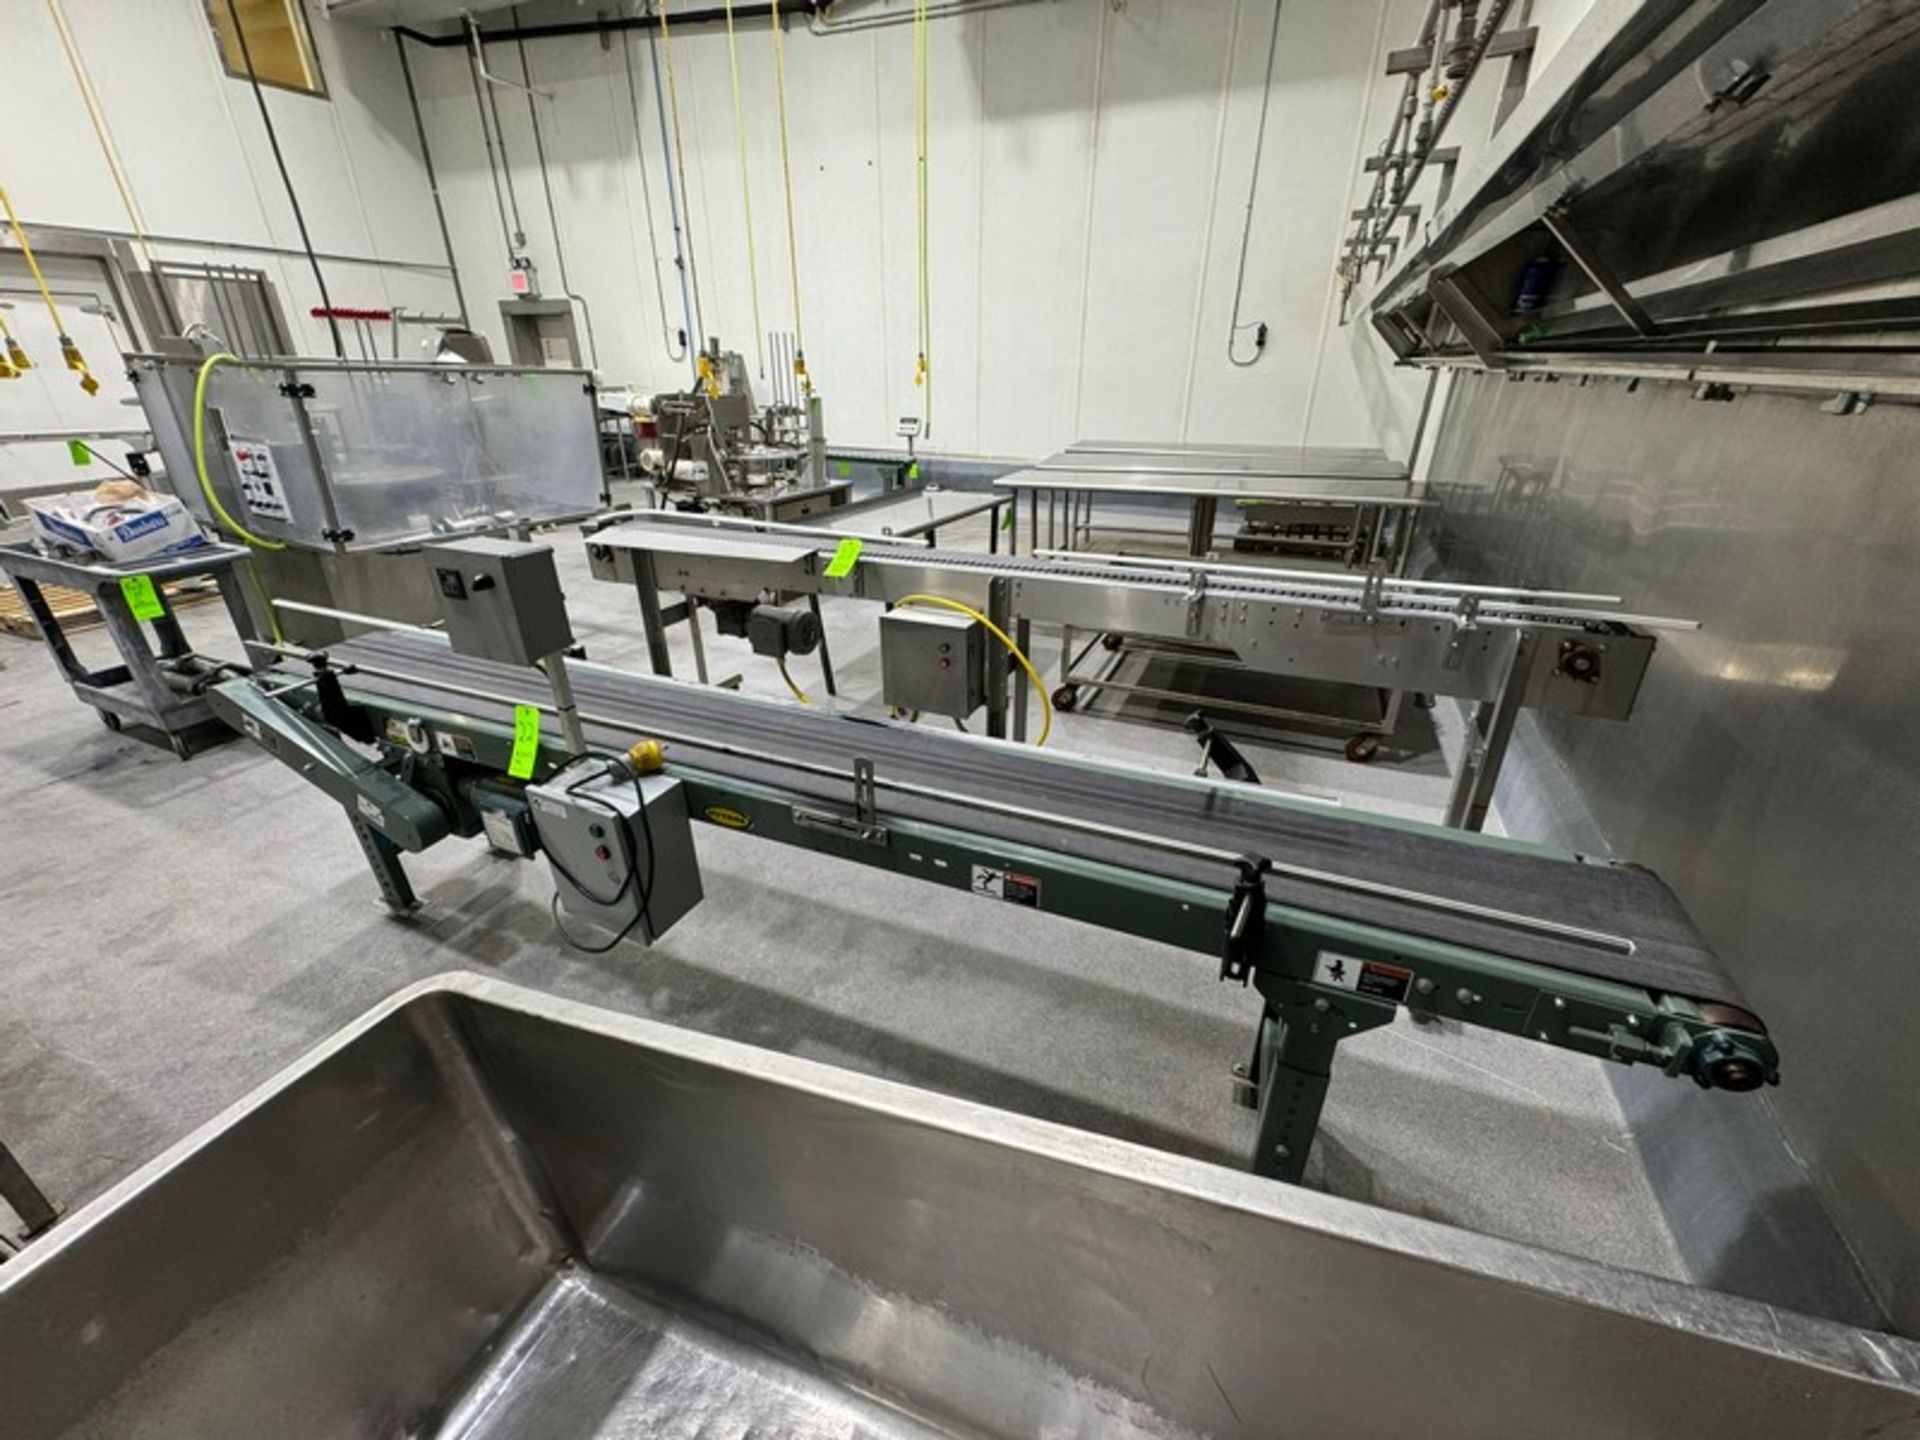 Straight Section of Hytrol Case Conveyor - Image 2 of 4